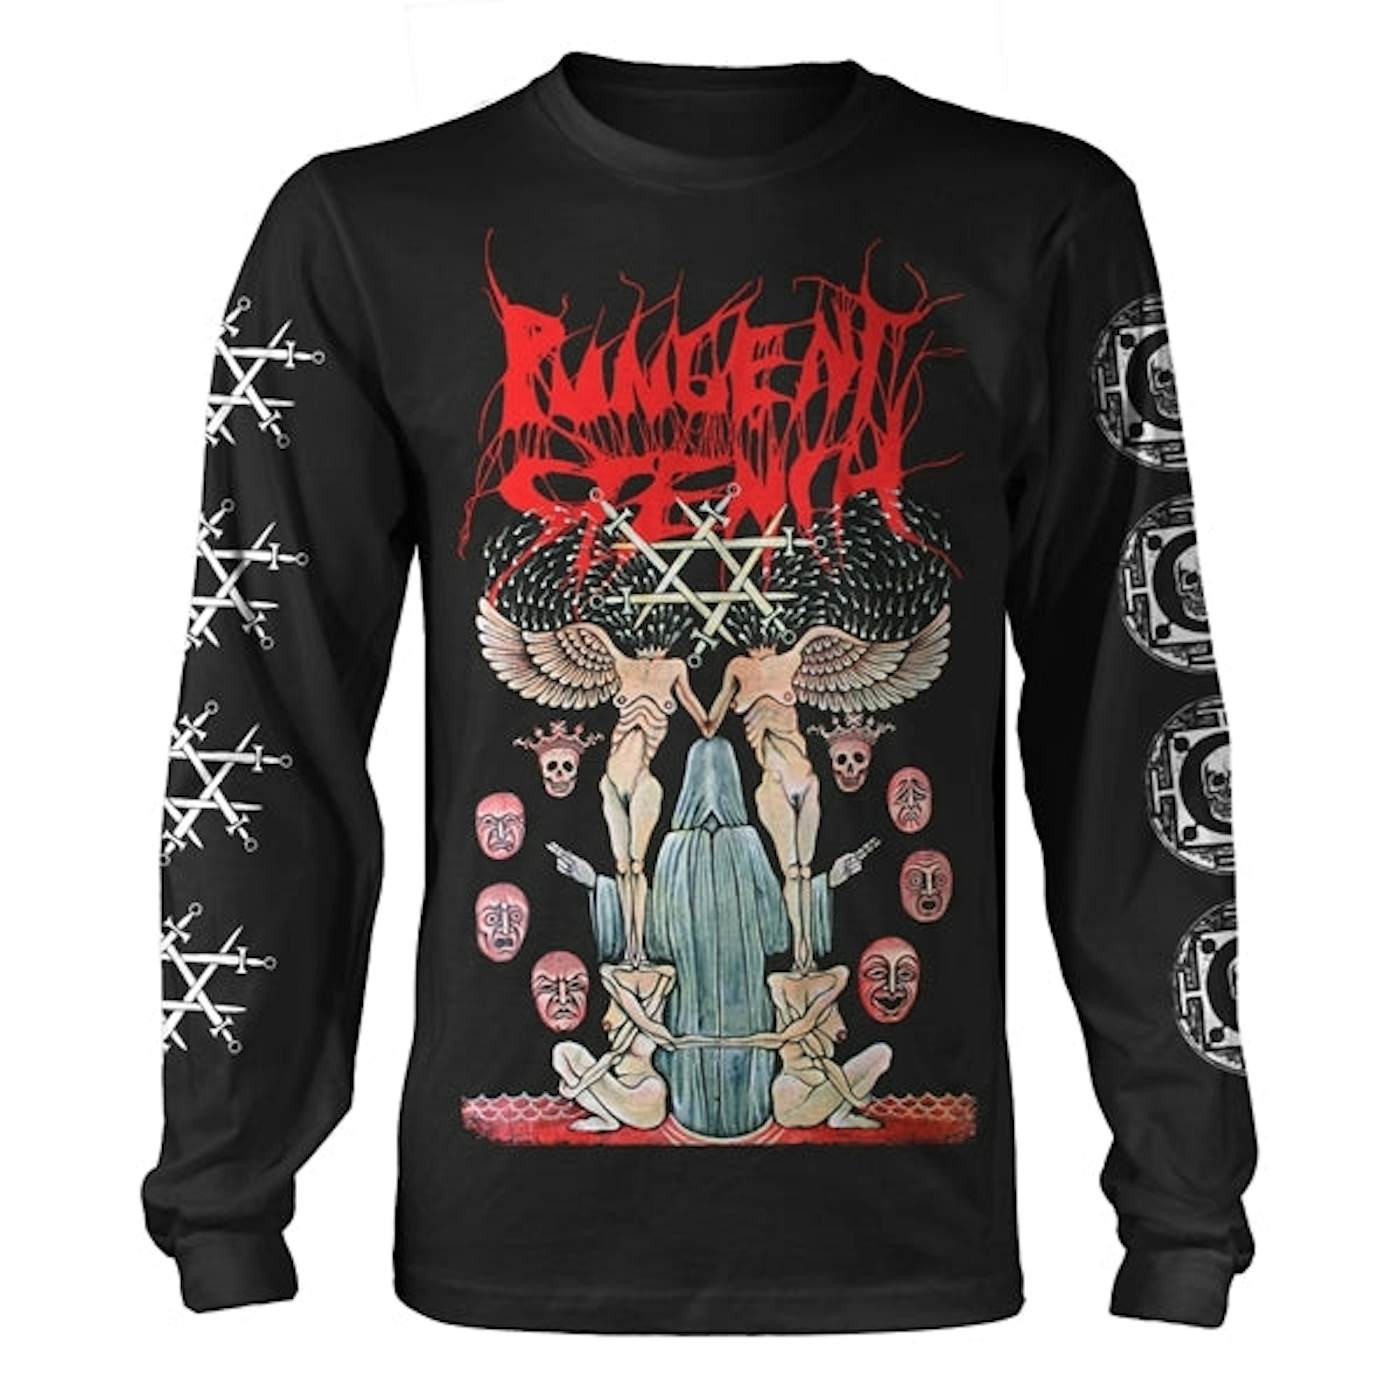 Pungent Stench Long Sleeve T Shirt - Smut Kingdom 2